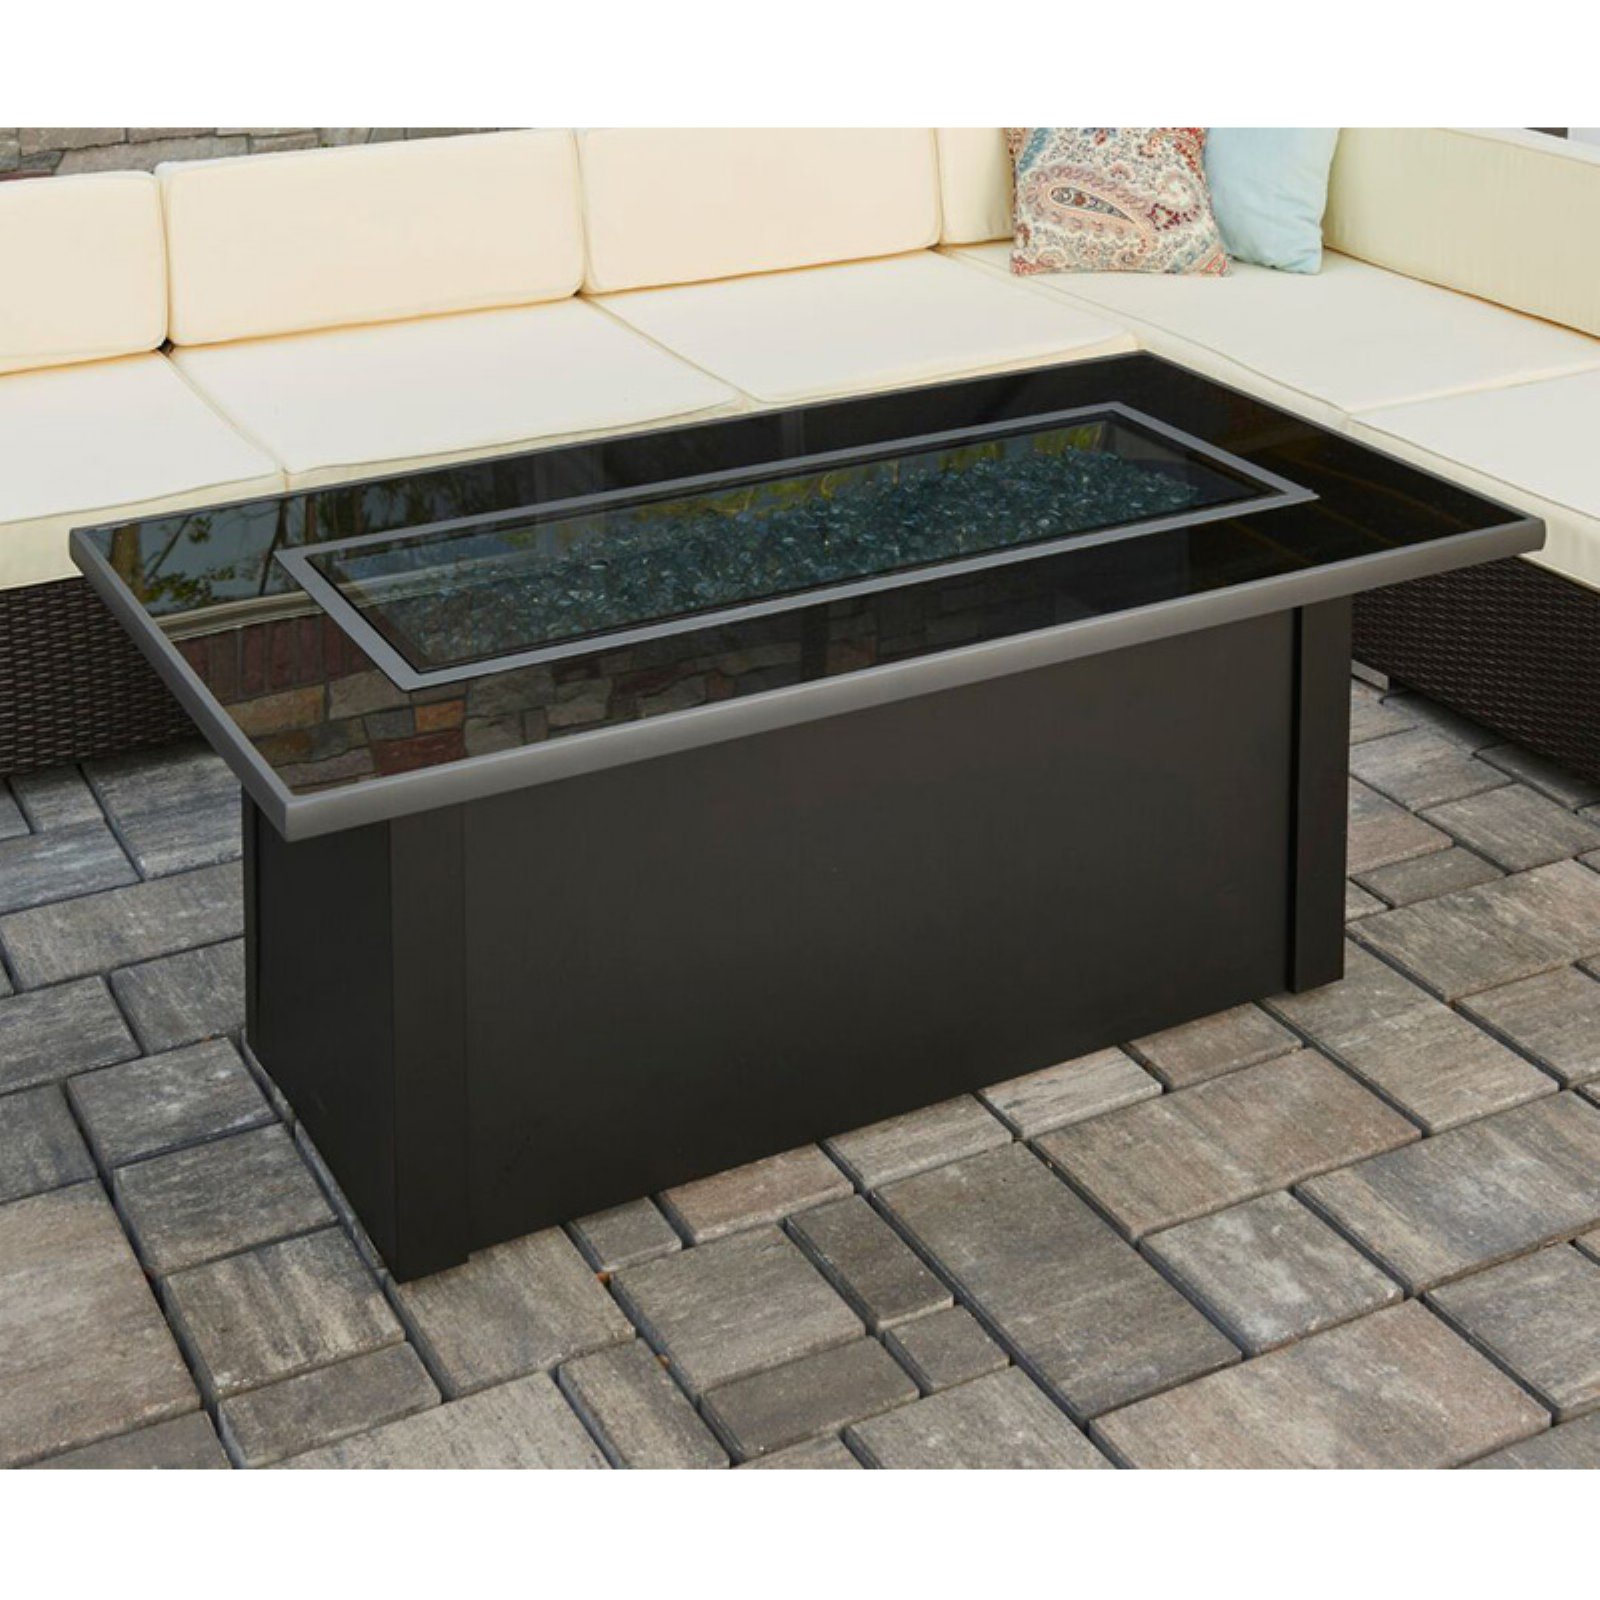 Refurbished Fireplaces Inspirational Outdoor Greatroom Monte Carlo 59 3 In Fire Table with Free Cover